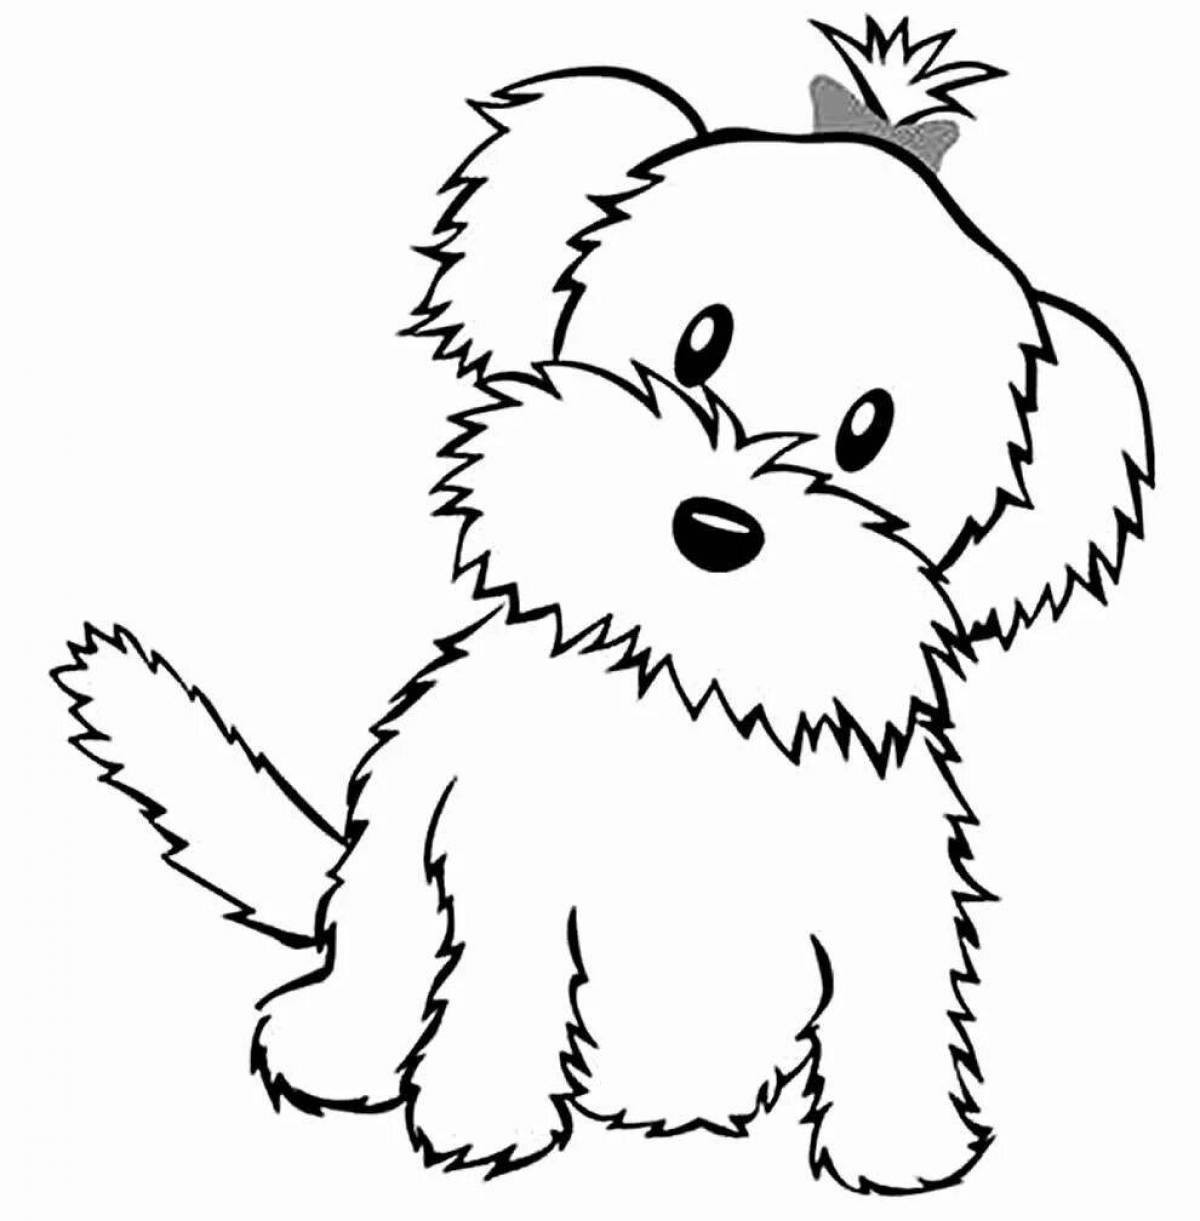 Coloring book cheerful light dog